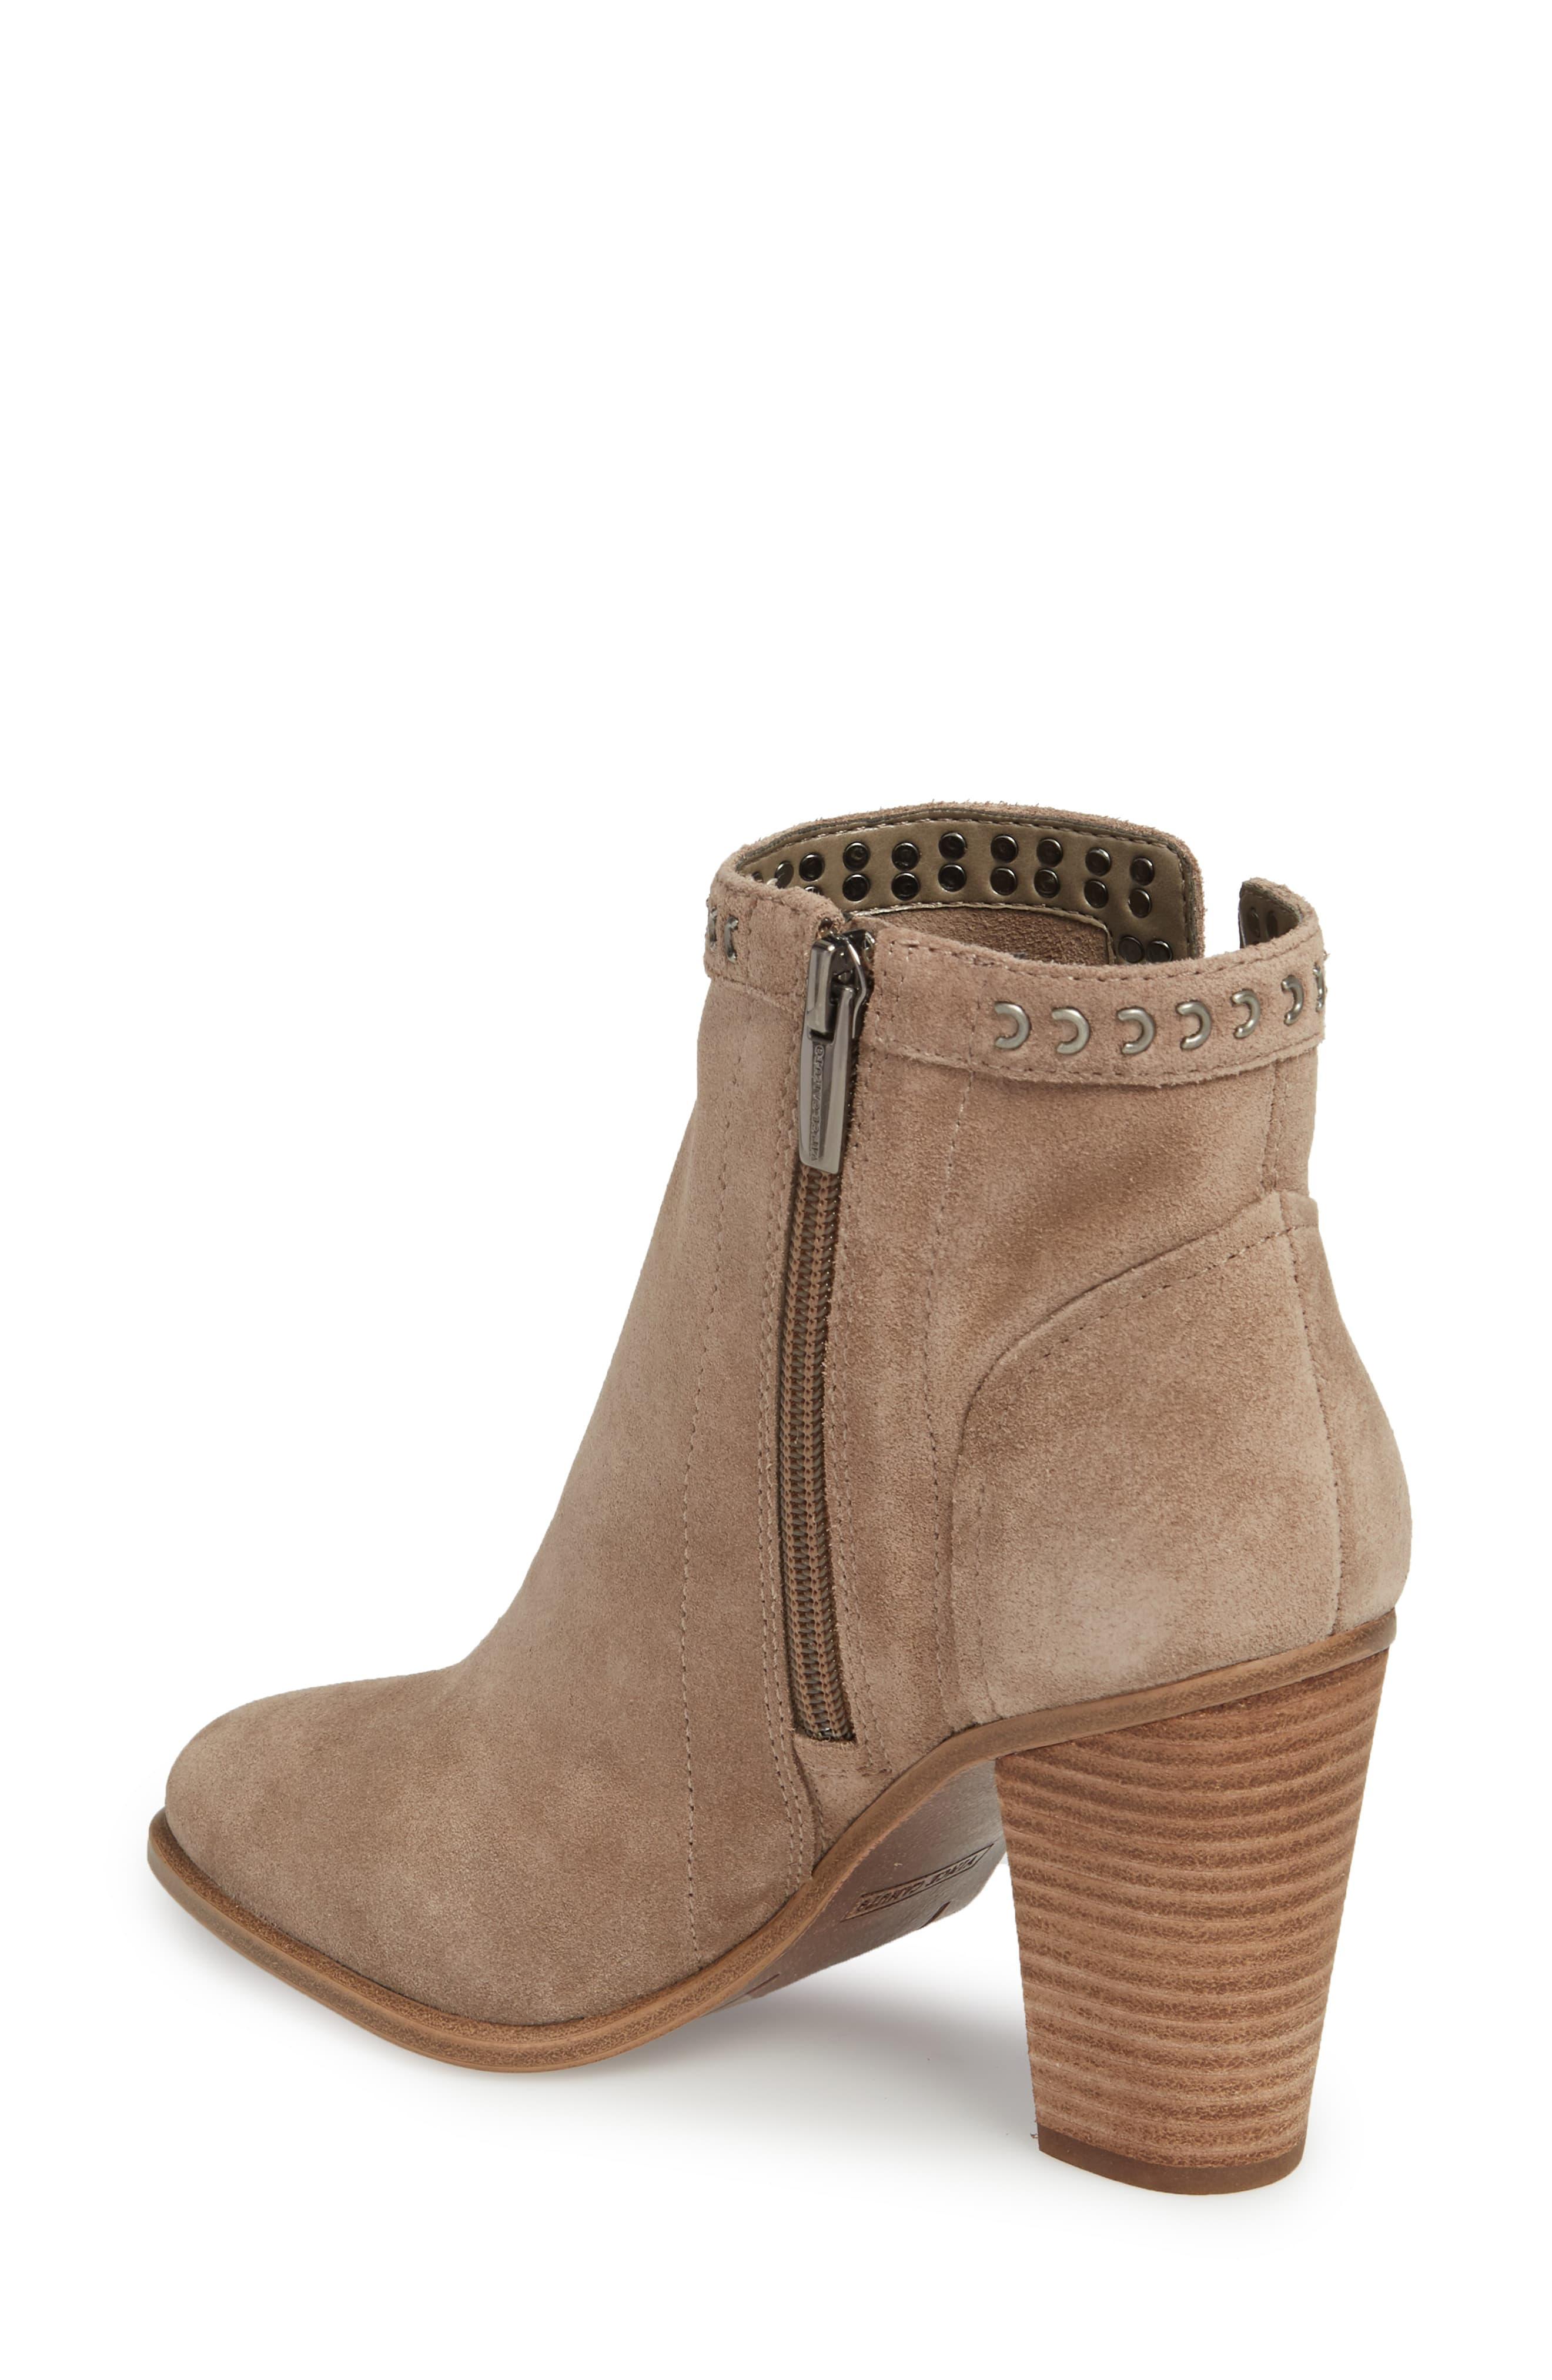 finchie bootie vince camuto